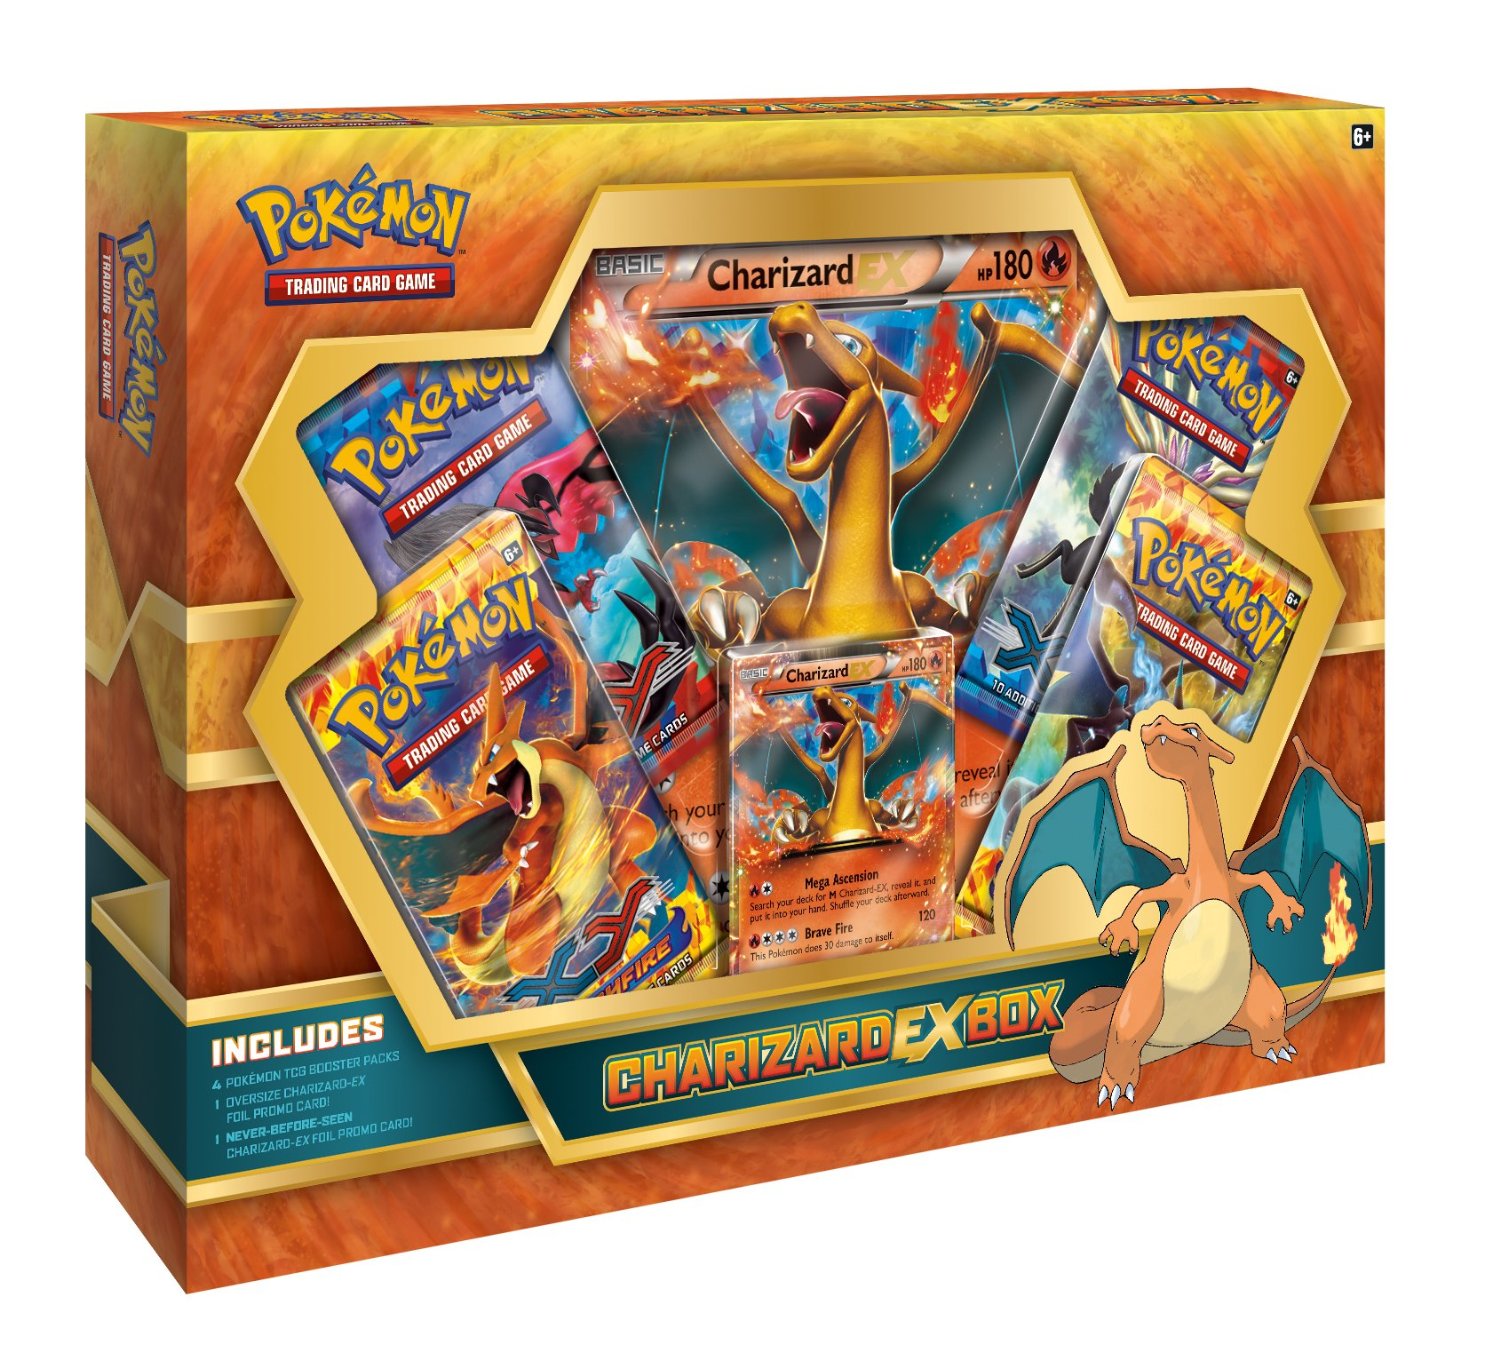 Pokemon TCG Charizard EX Box $9.99 at Target Stores Day (50% Off Daily ...